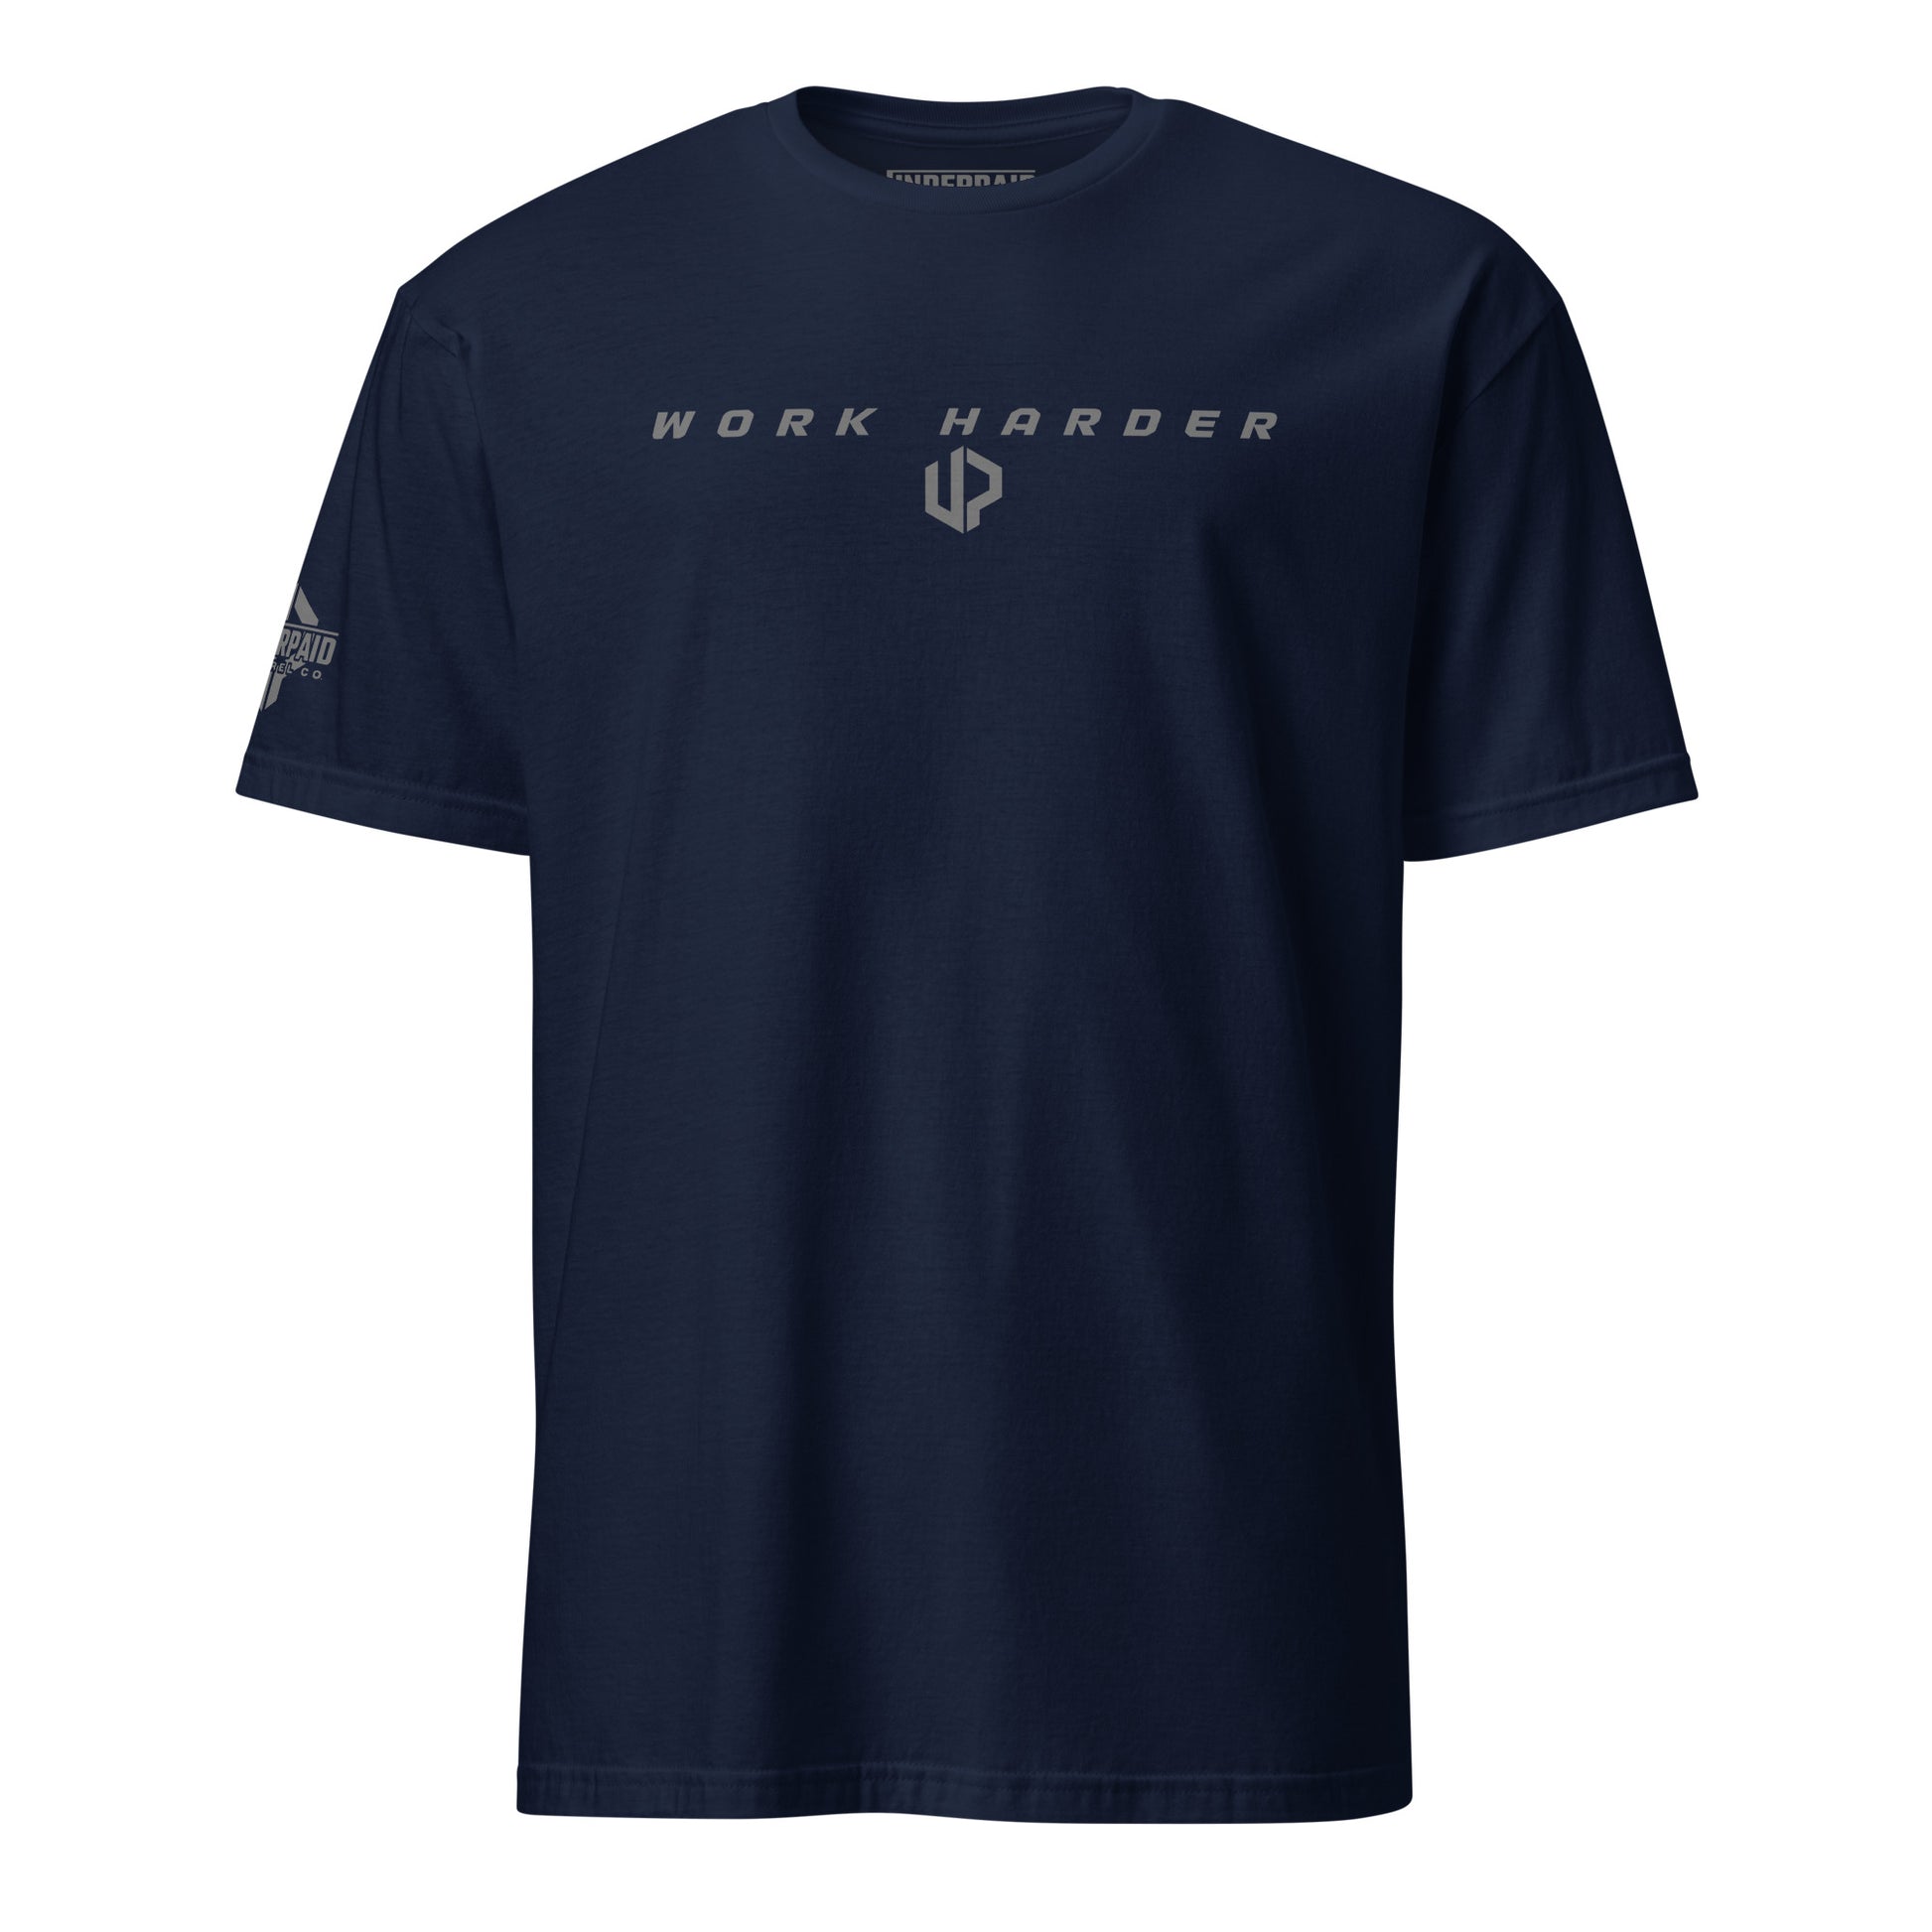 Work Harder short sleeve tee featuring Underpaid Apparel’s logo